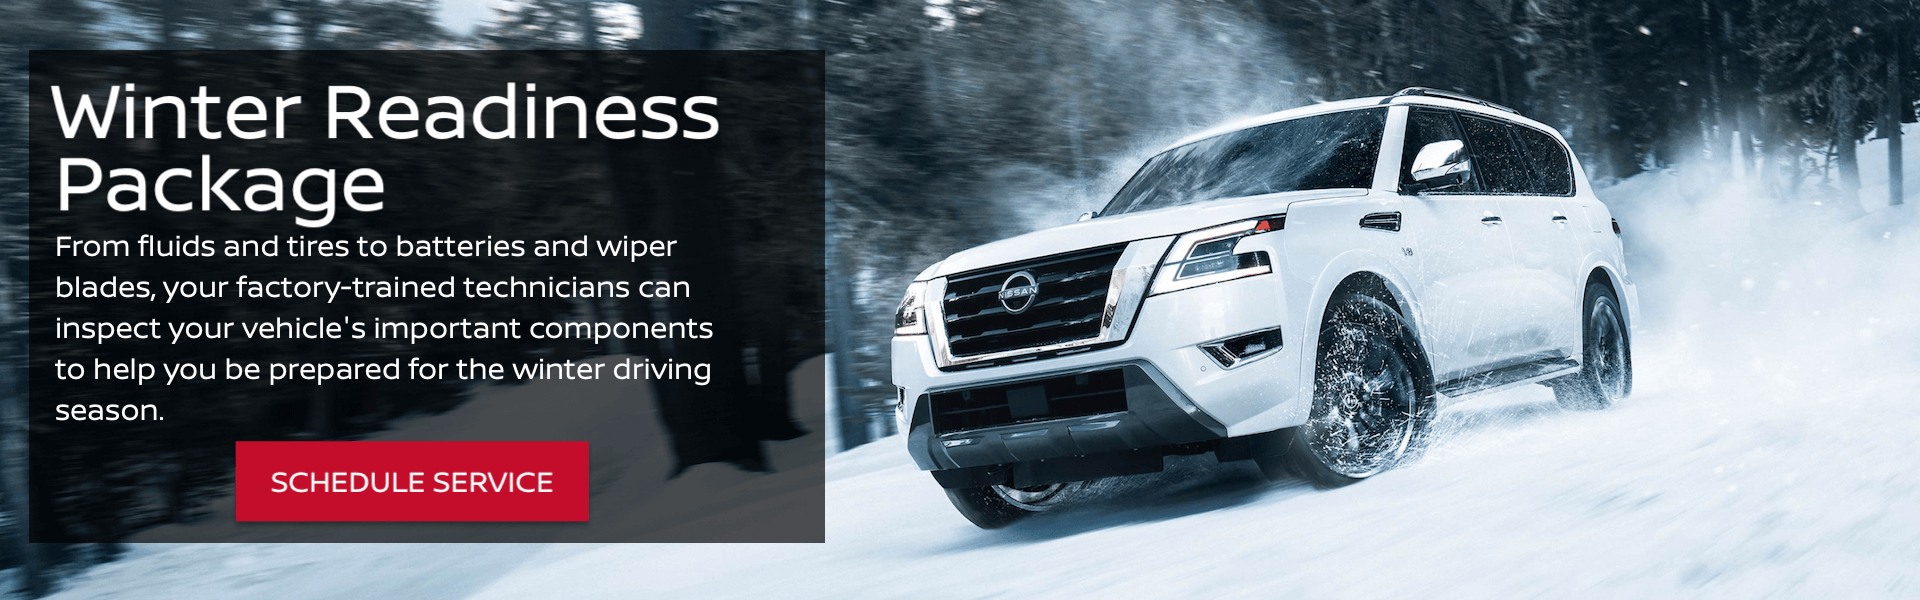 Nissan Winter Readiness Package